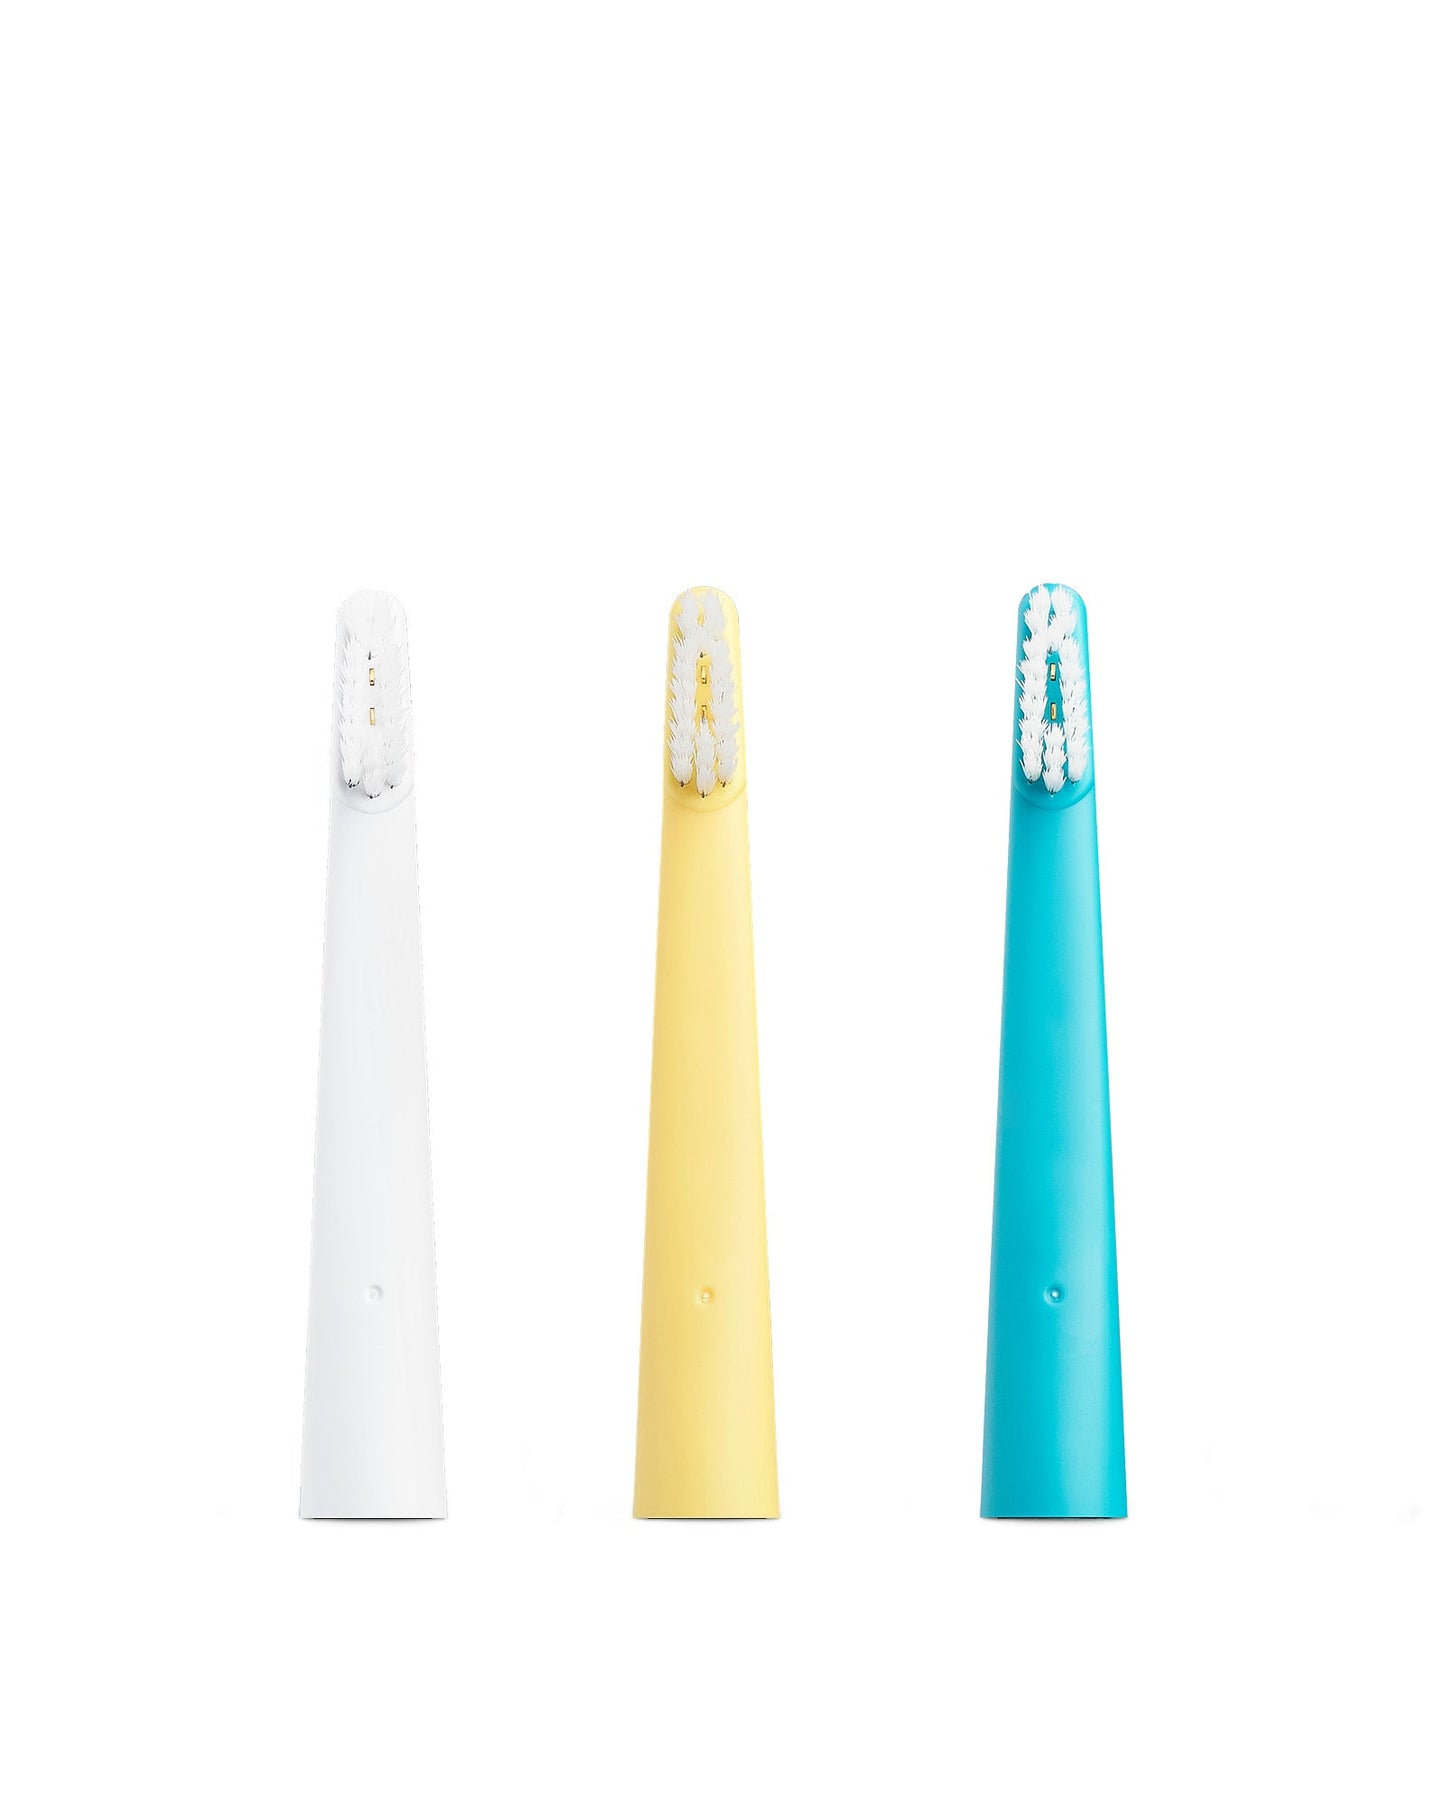 Three replacement brush heads next to each other in all three colors